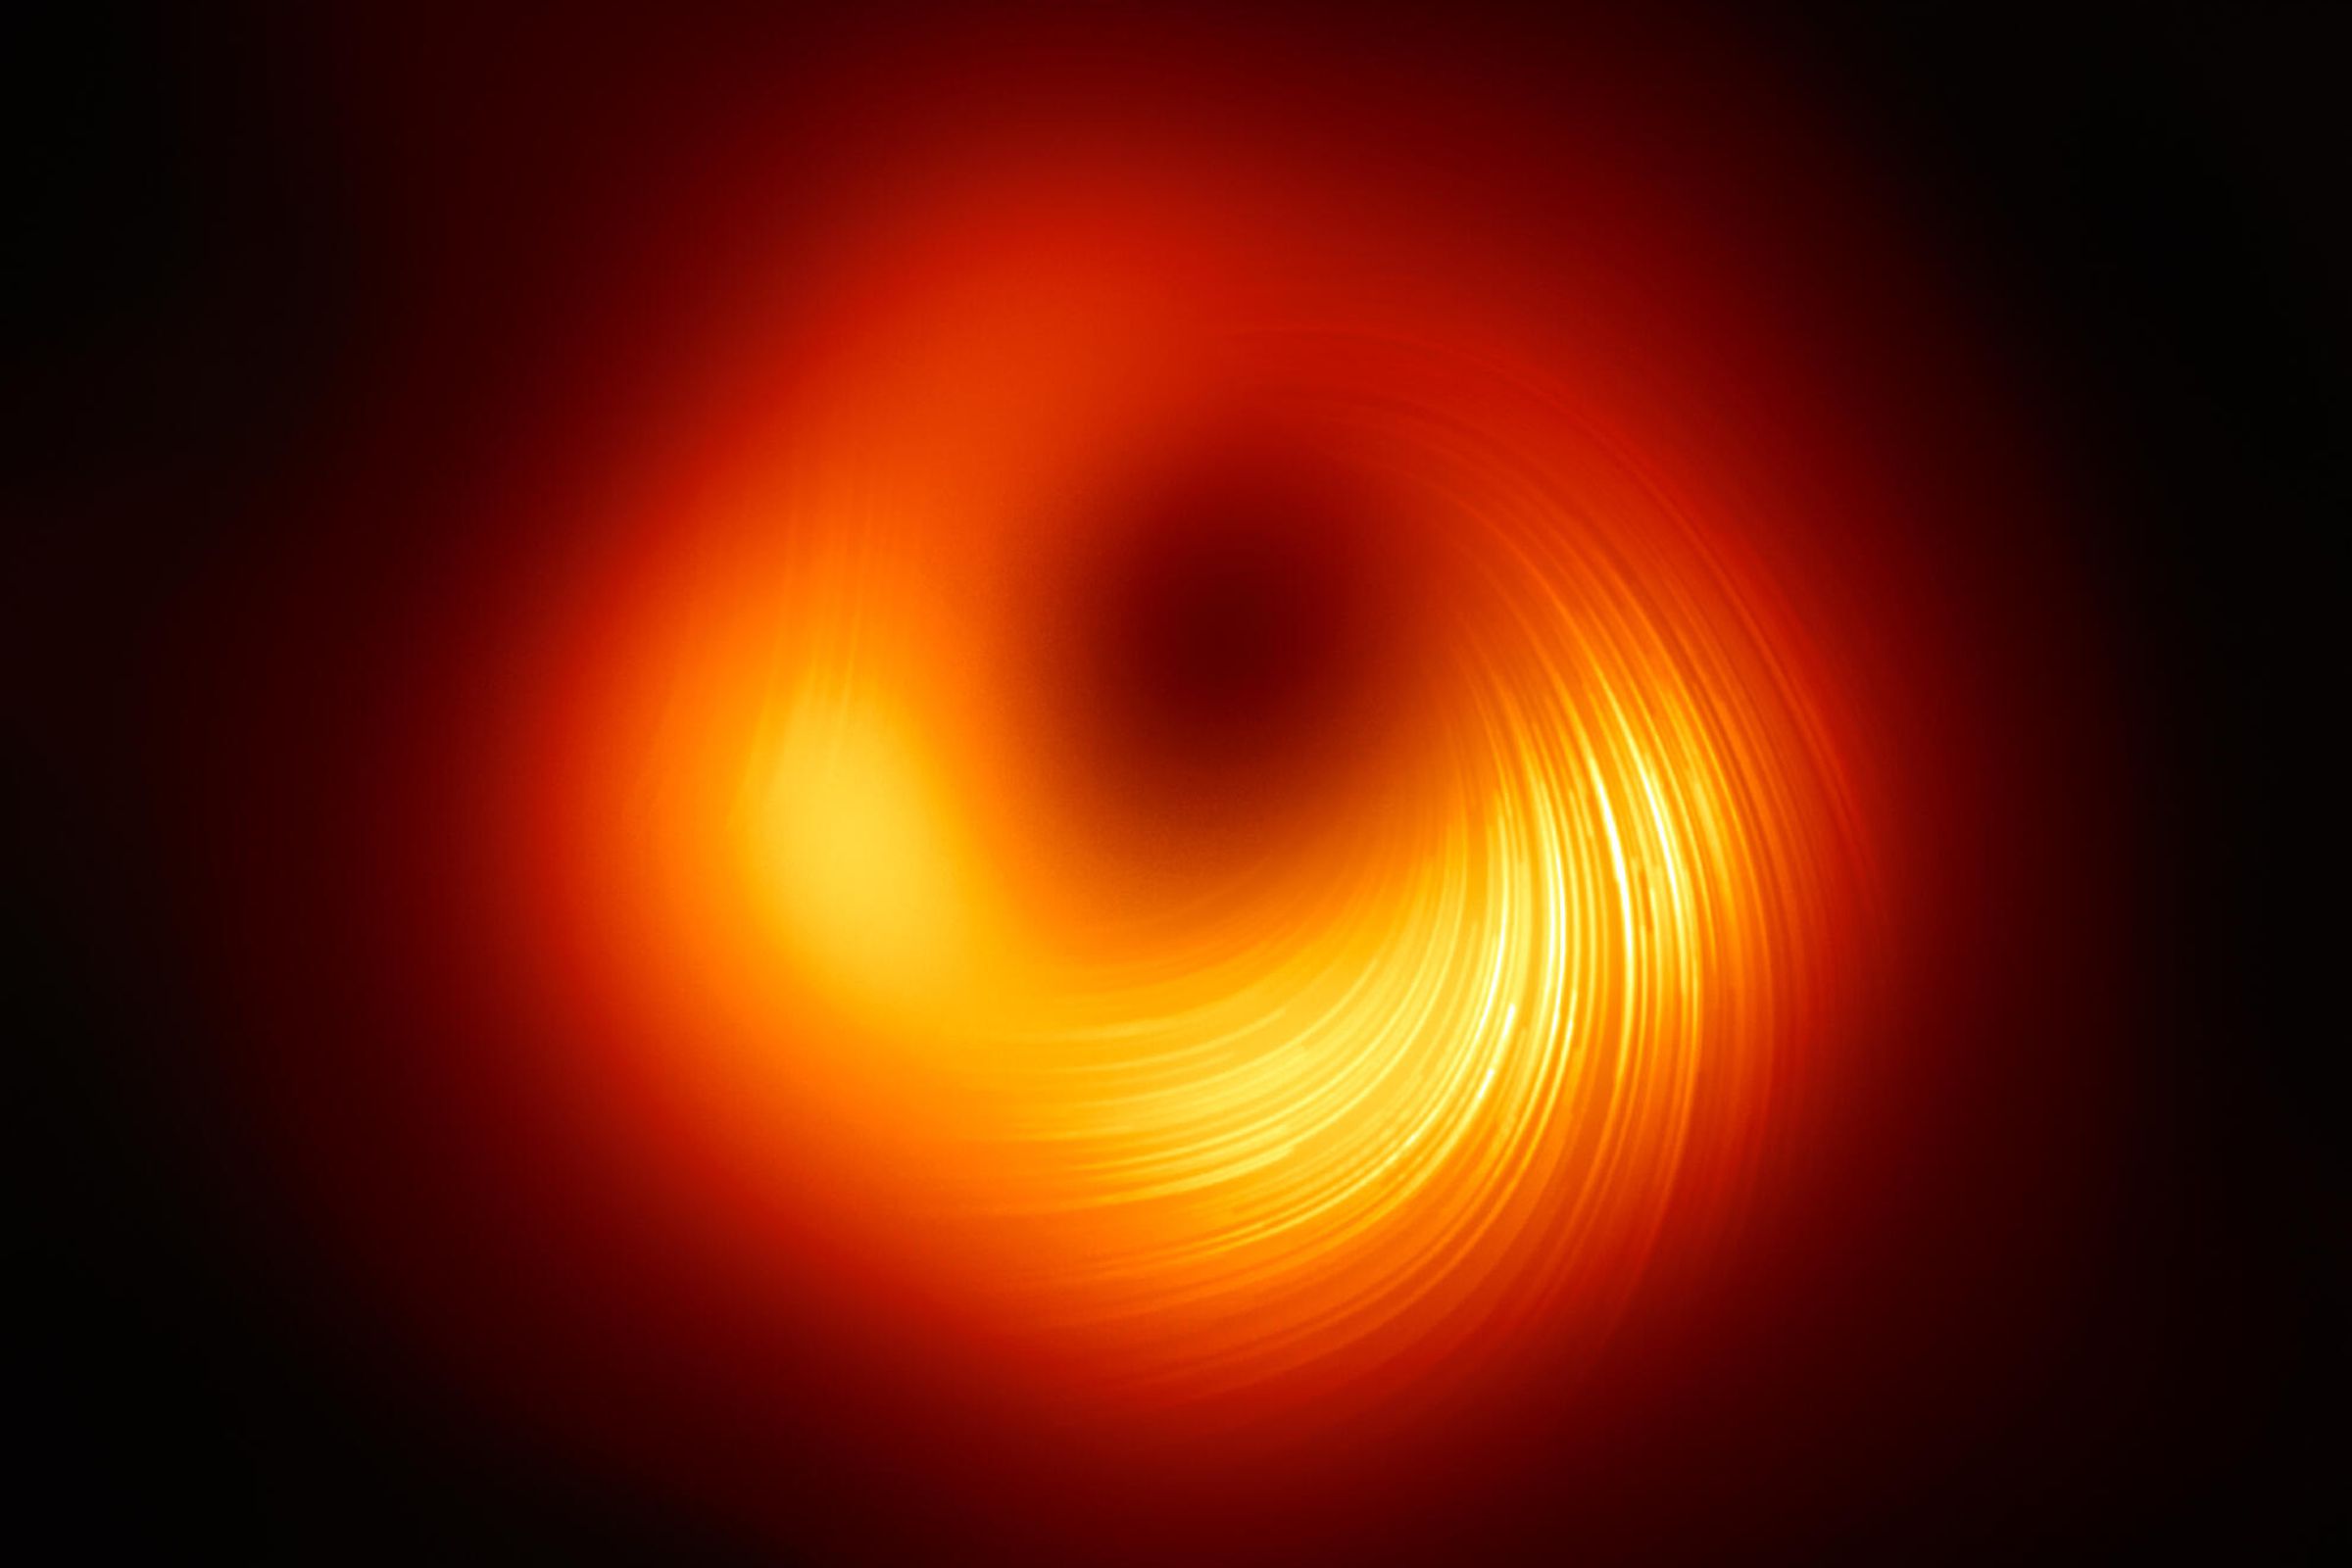 An image of the M87 supermassive black hole, captured by scientists of the Event Horizon Telescope and released on Wednesday.